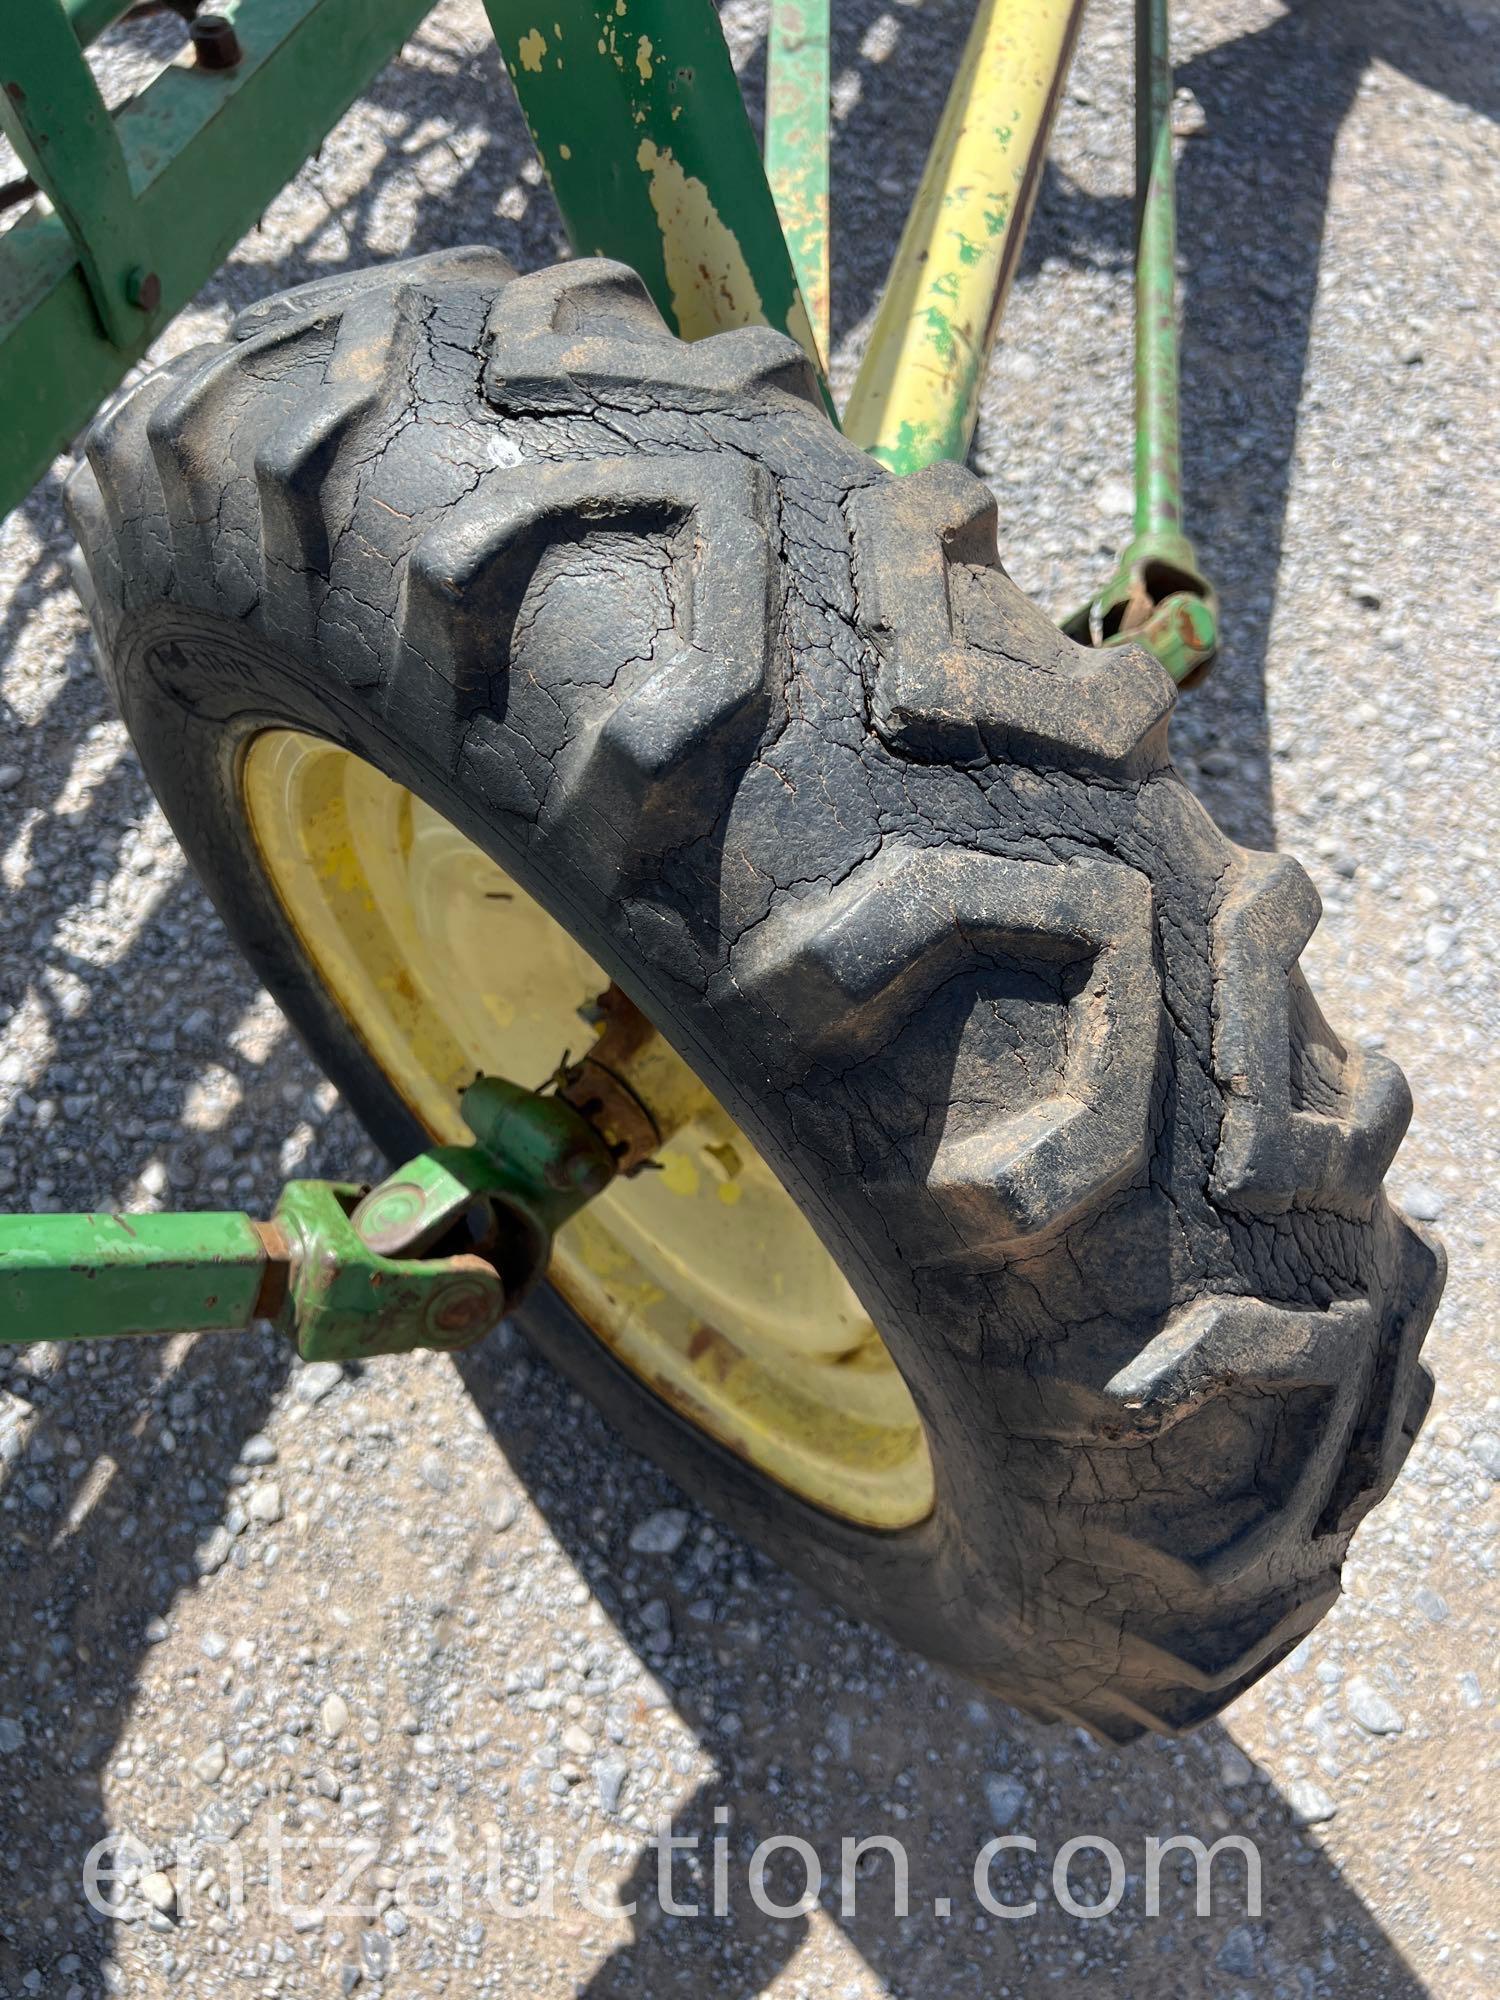 JD 640 SIDE DELIVERY HAY RAKE, PULL TYPE